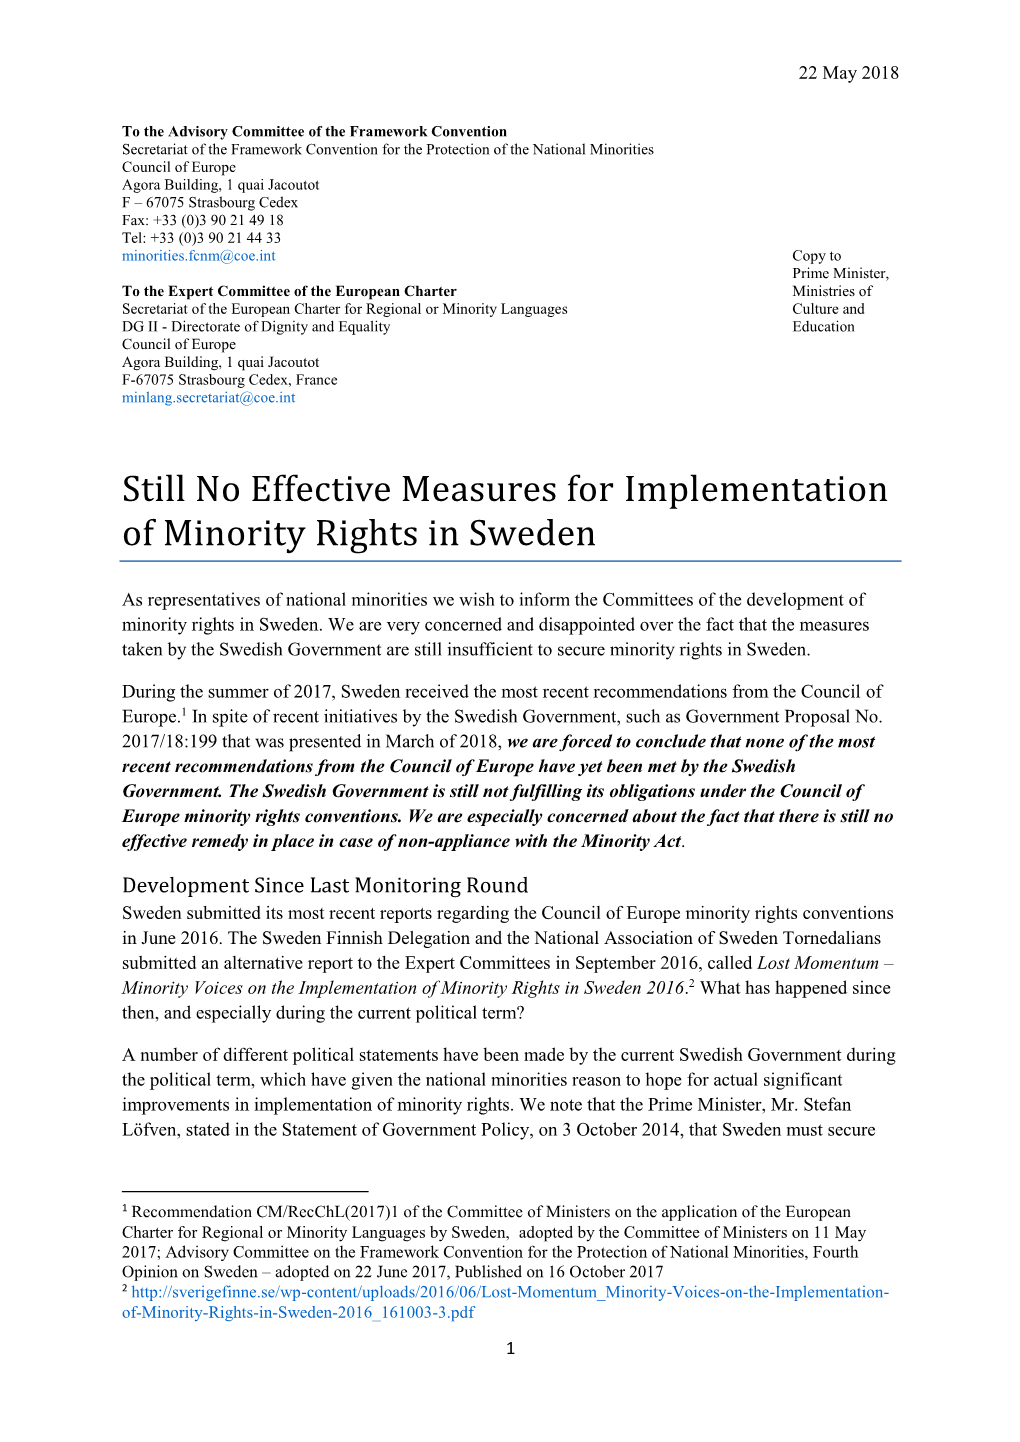 Still No Effective Measures for Implementation of Minority Rights in Sweden